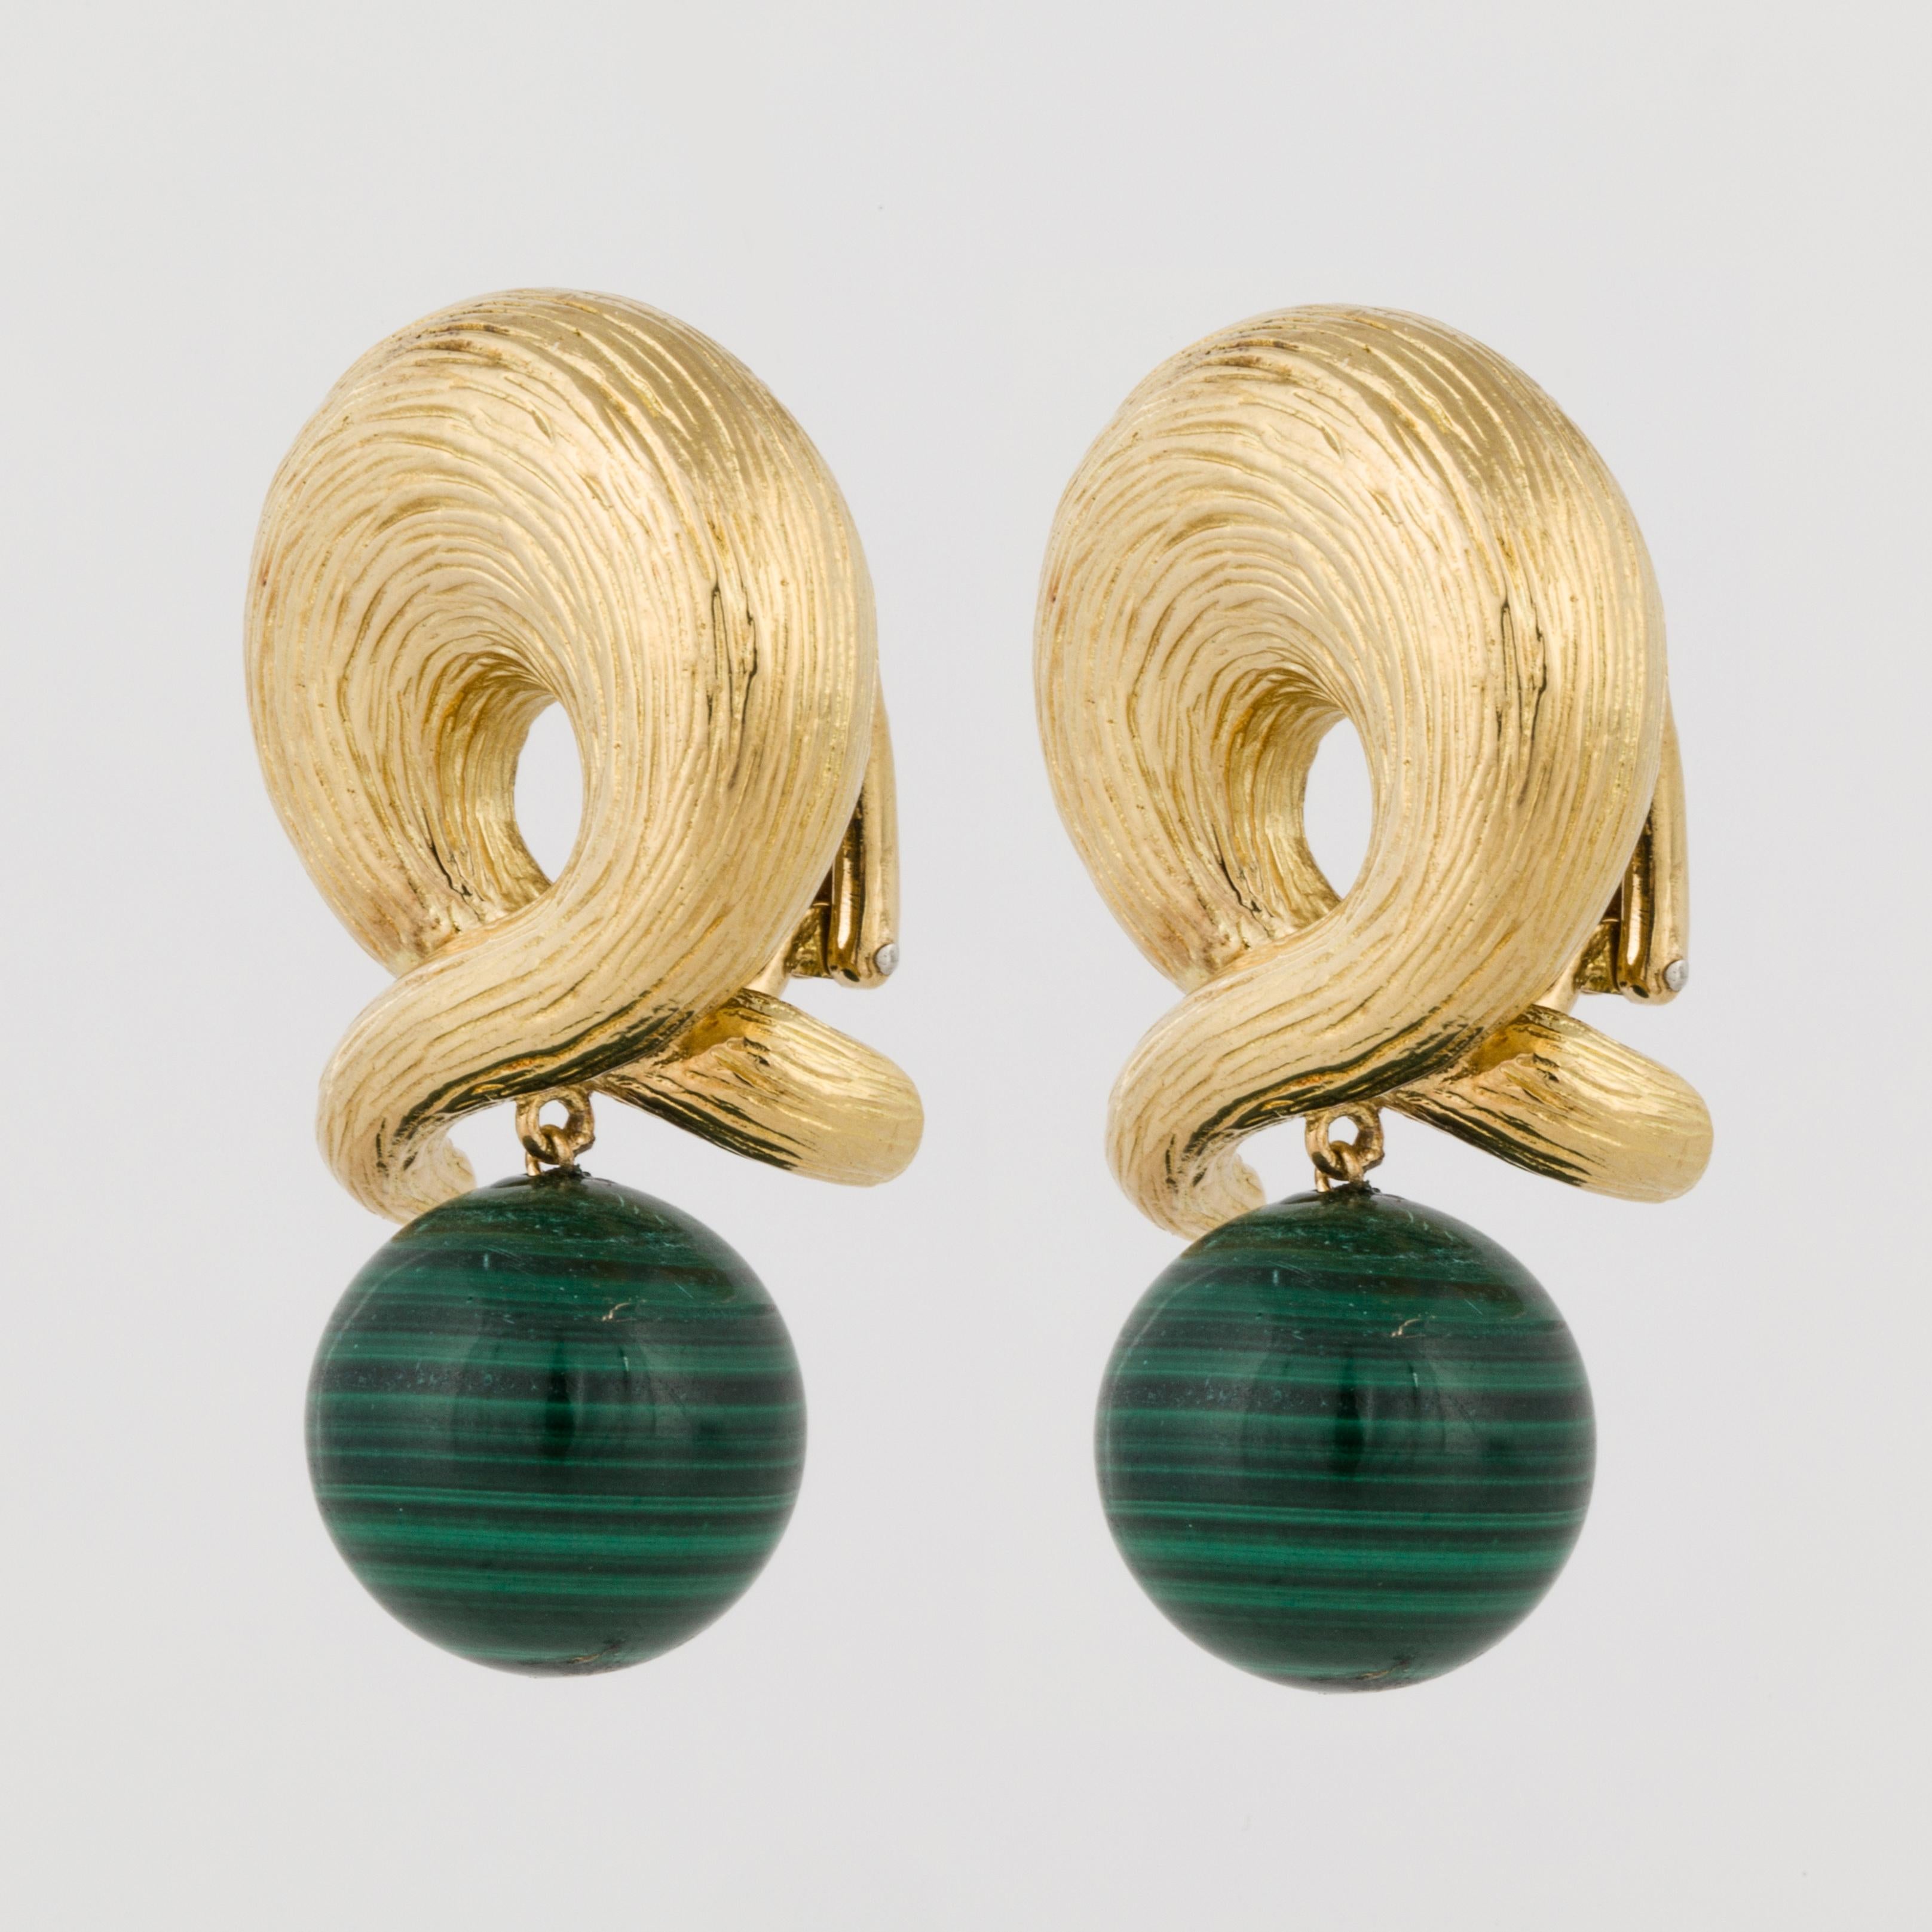 Earrings are composed of 18K yellow textured gold with a malachite bead drop.  The malachite measures 14mm, while the entire earrings measure 1 1/2 inches long and 7/8 inches wide.  These earrings are a clip style.